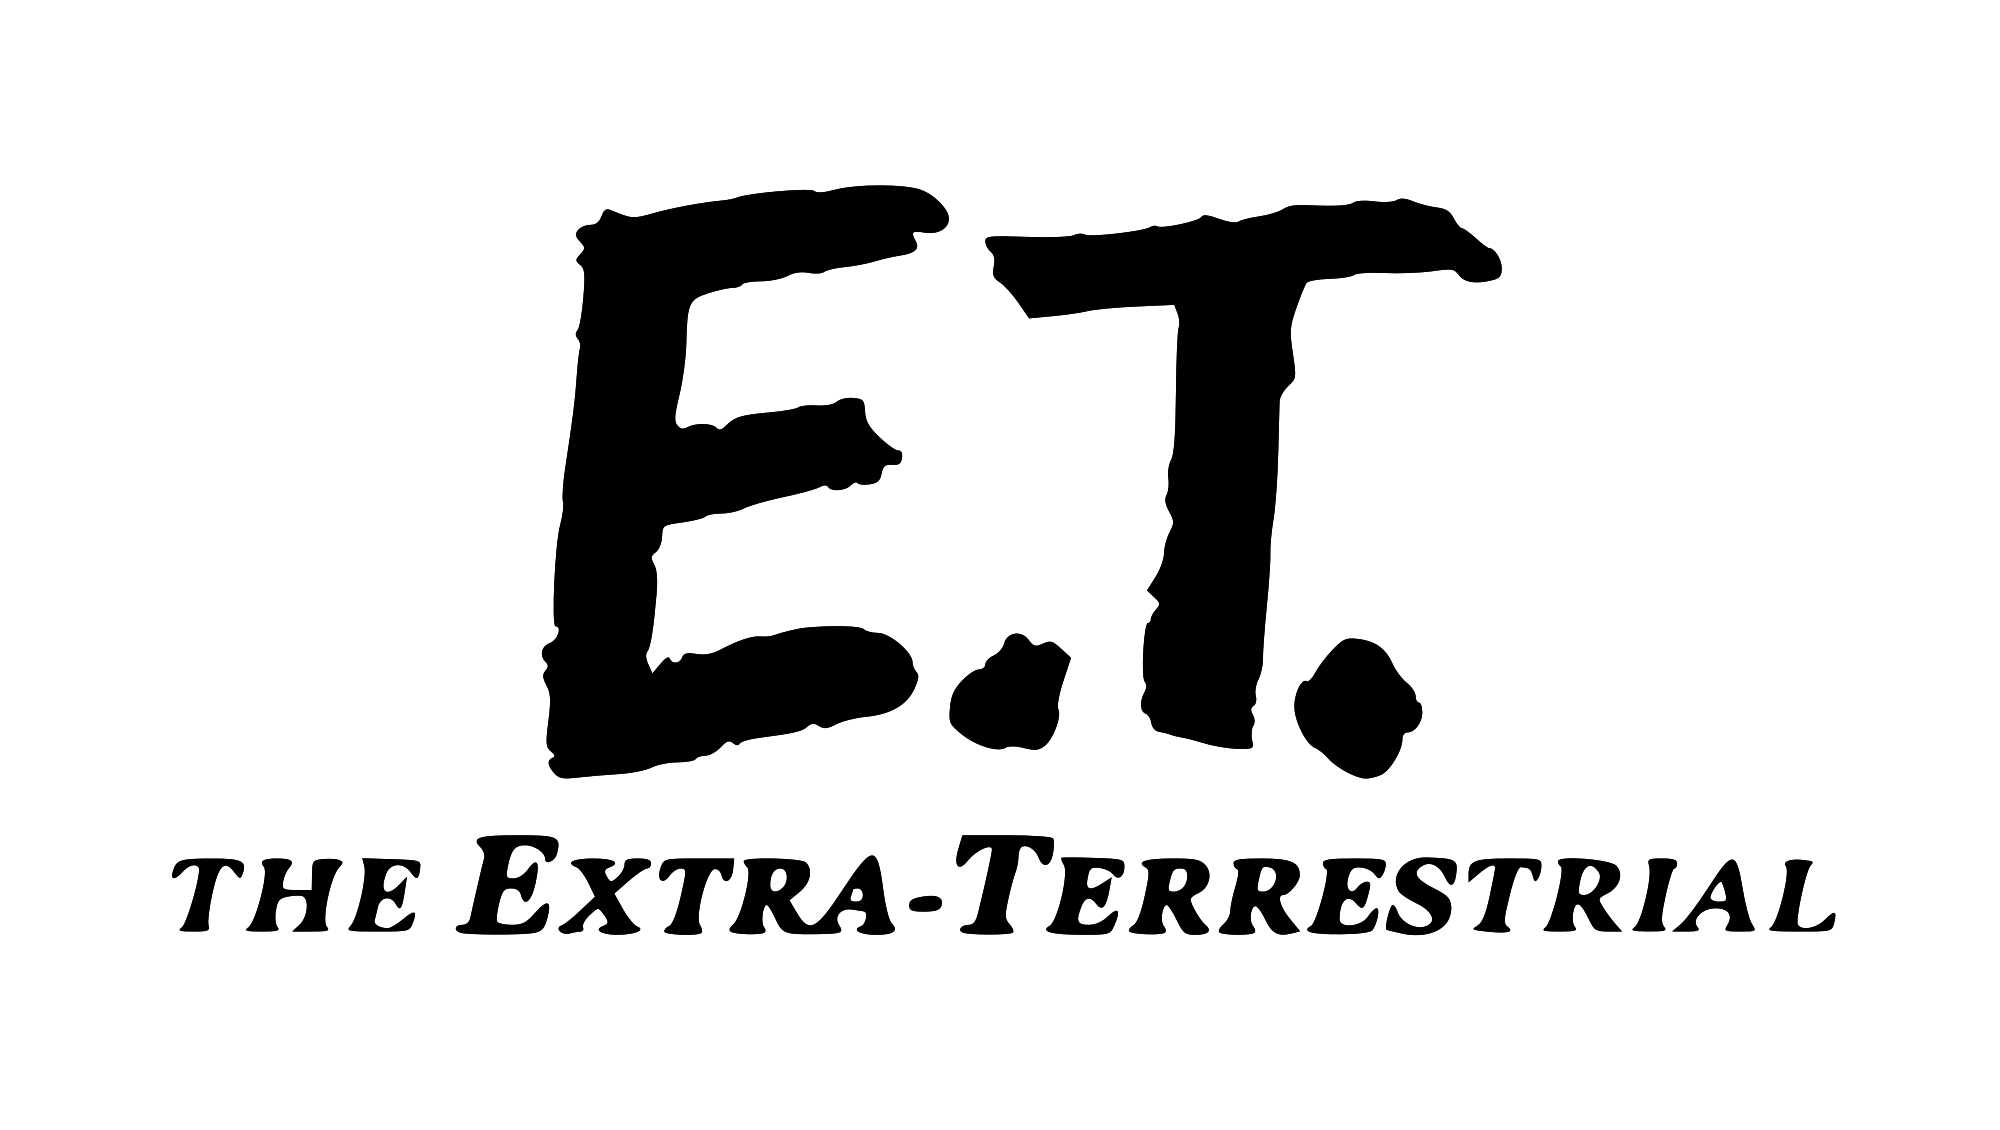 E.T. The Extra-Terrestrial Logo - File:ET logo 2 (no drop shadow).svg - Wikimedia Commons